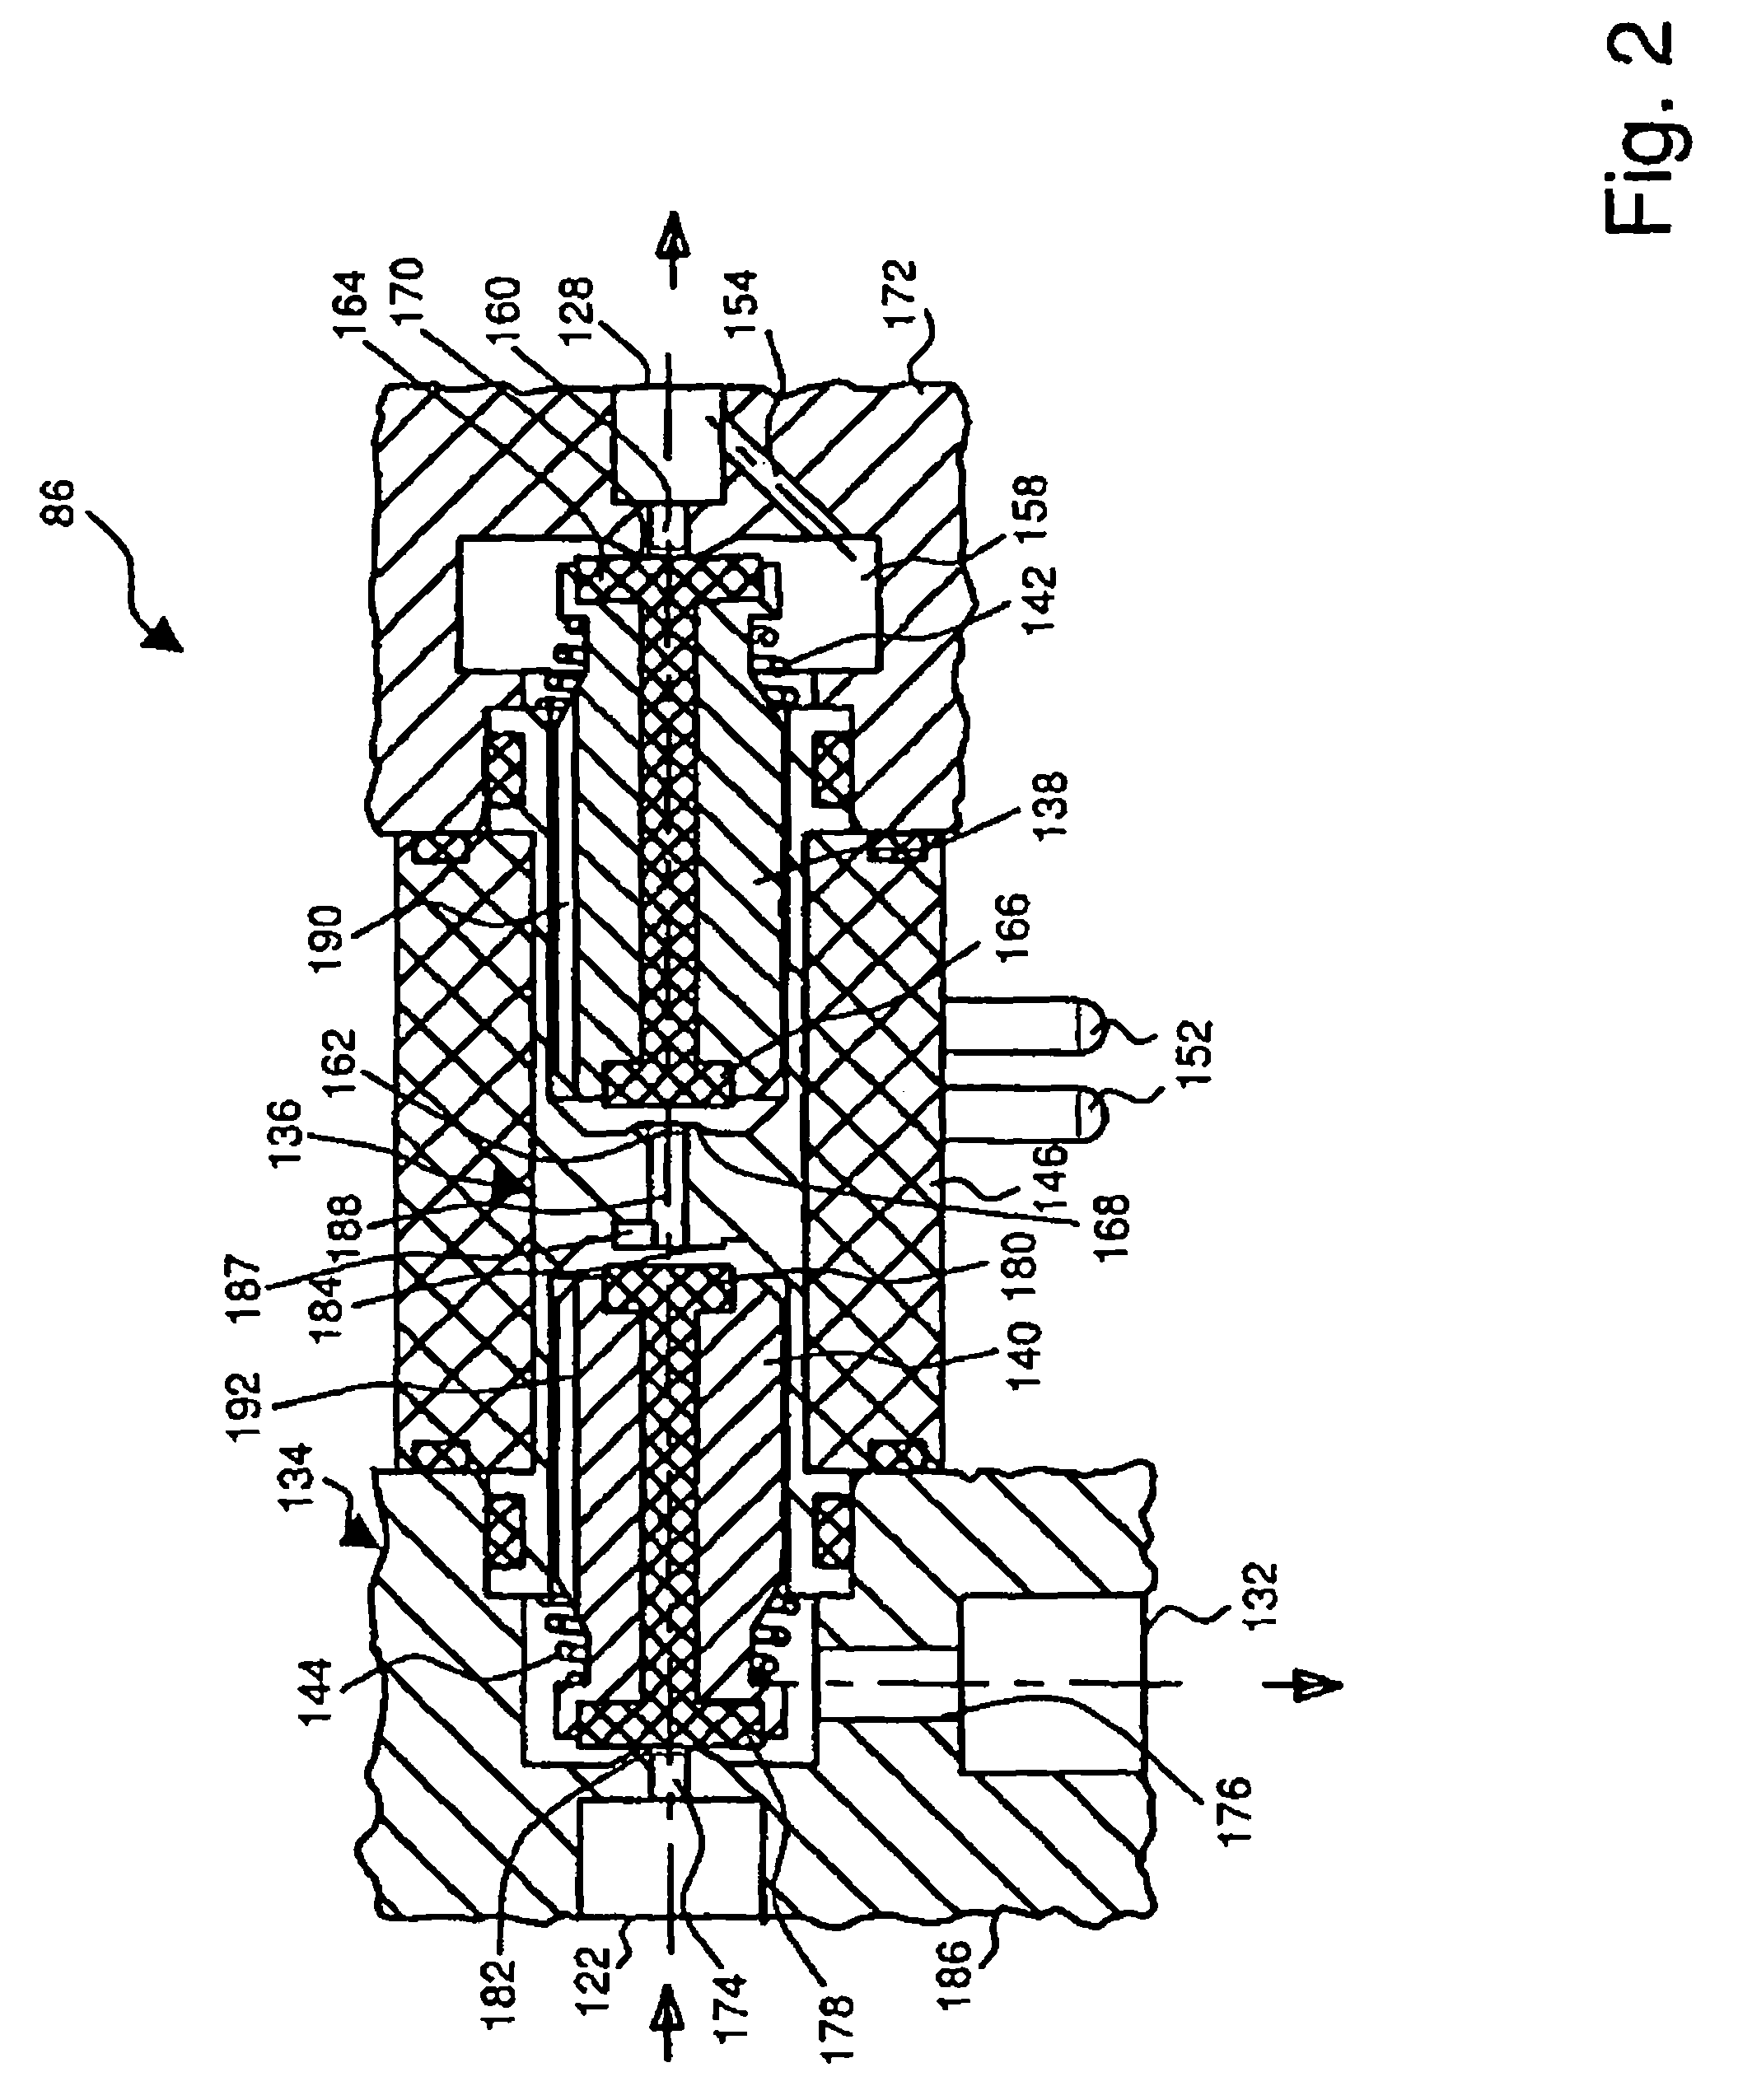 Valve unit for an electro-pneumatic brake control device for controlling a parking brake